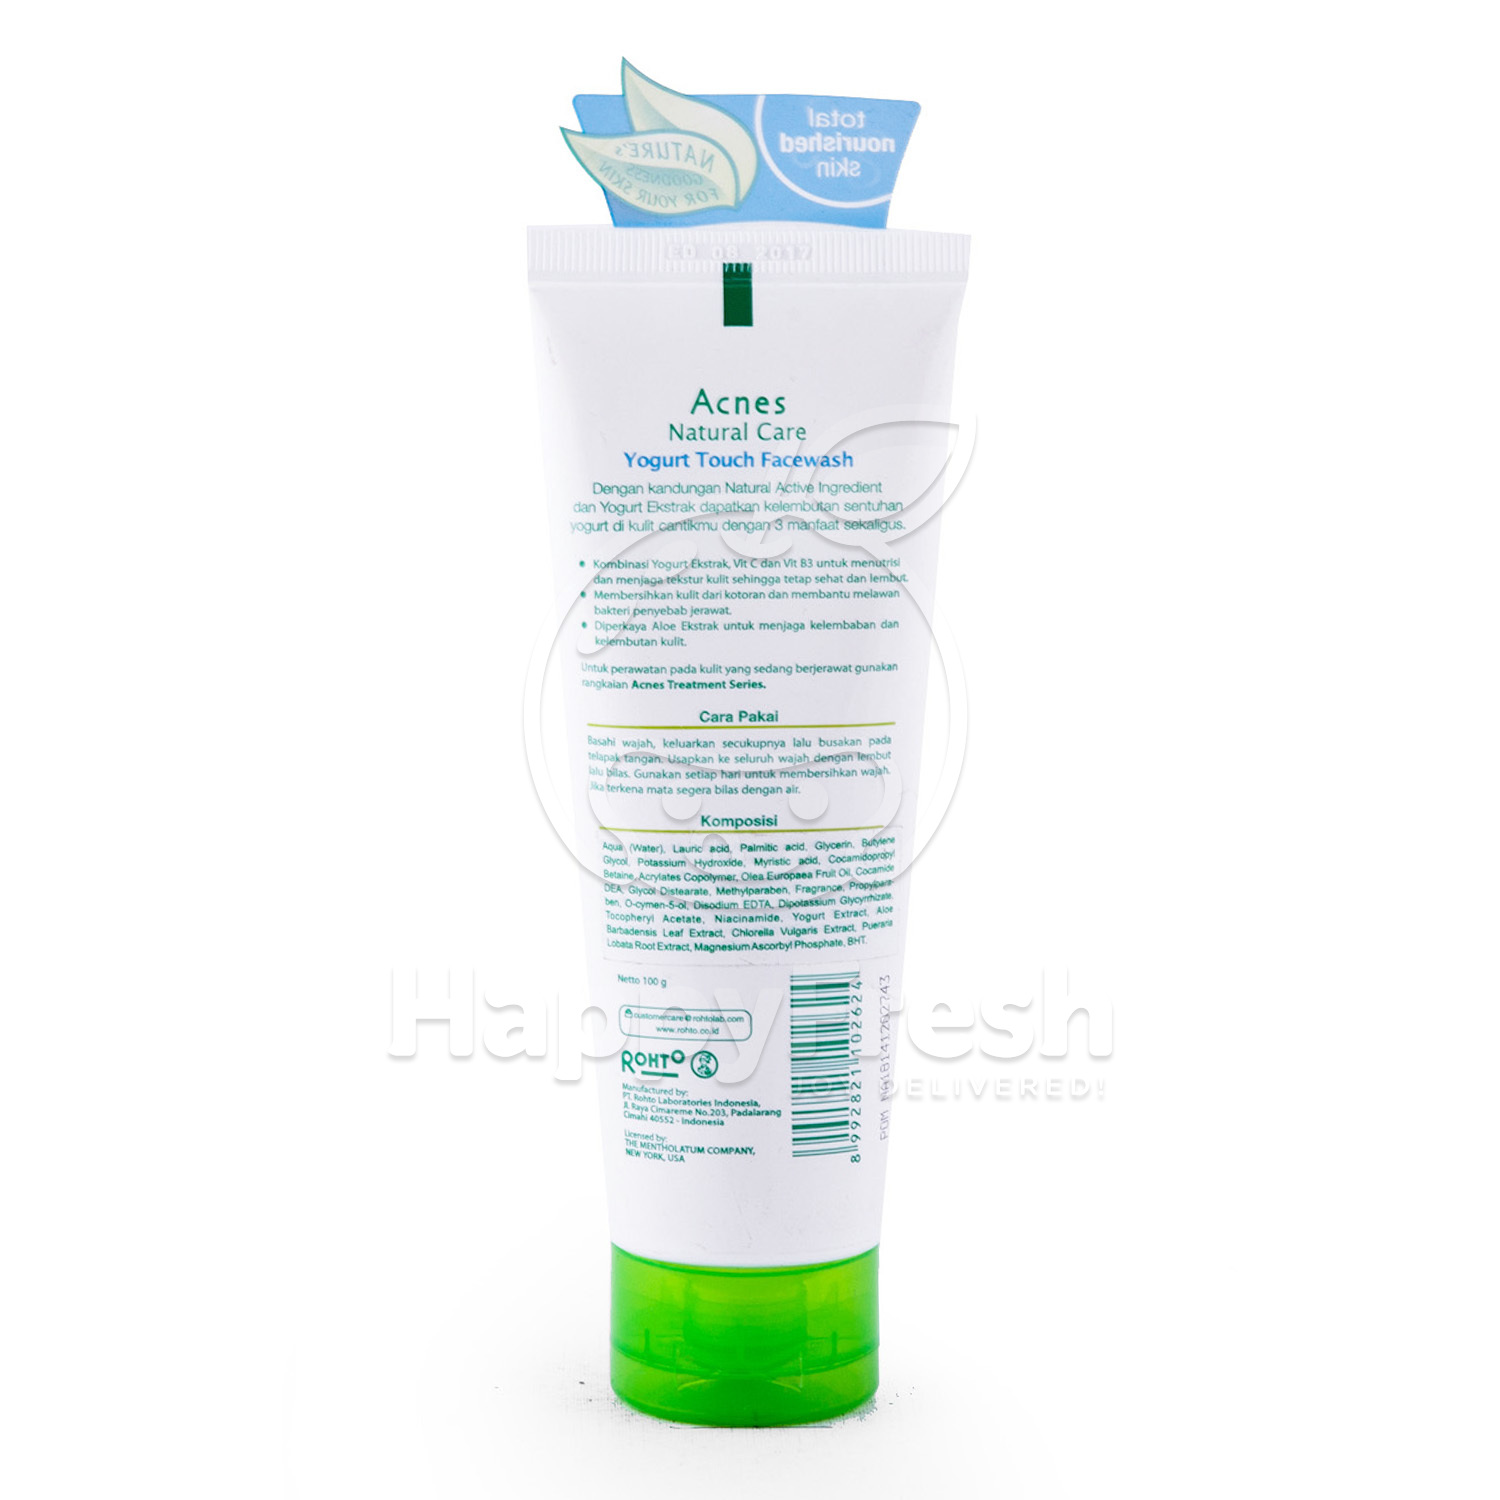 Acnes Natural Care Yogurt Touch Face Wash Jakarta